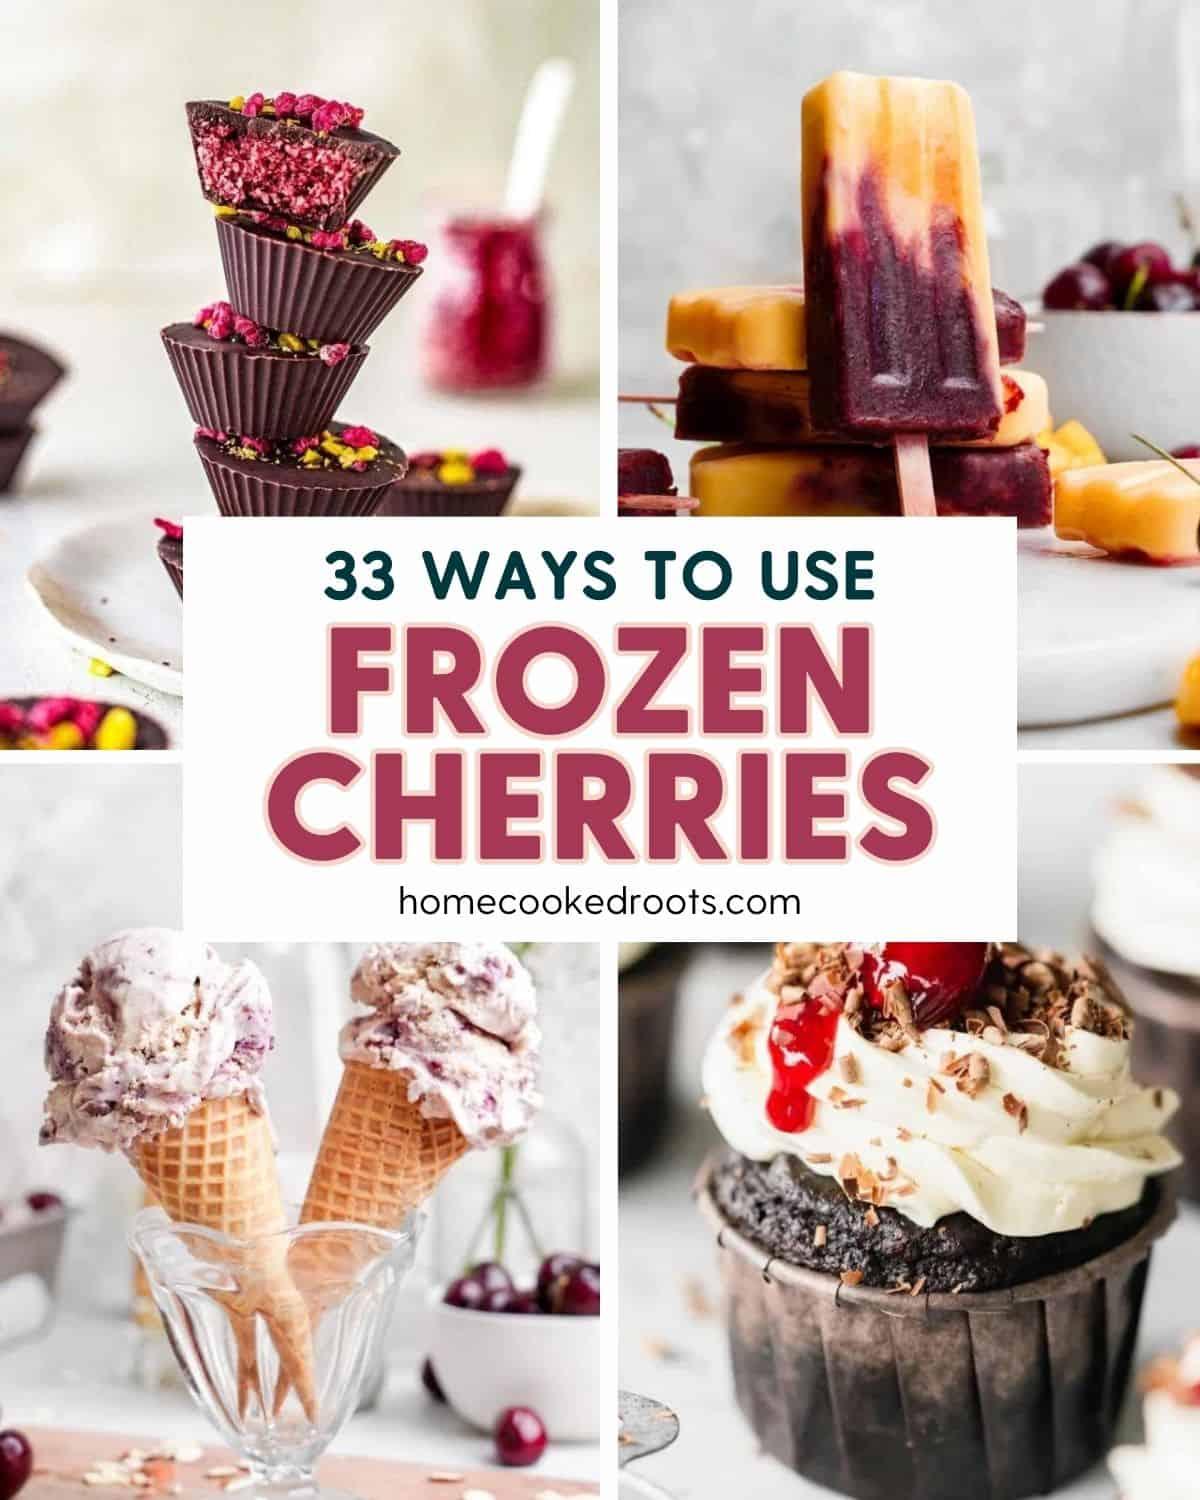 Collage of 4 images of recipes using frozen cherries. Overlay text that says 30+ Savory Chia Seed Recipes, homecookedroots.com